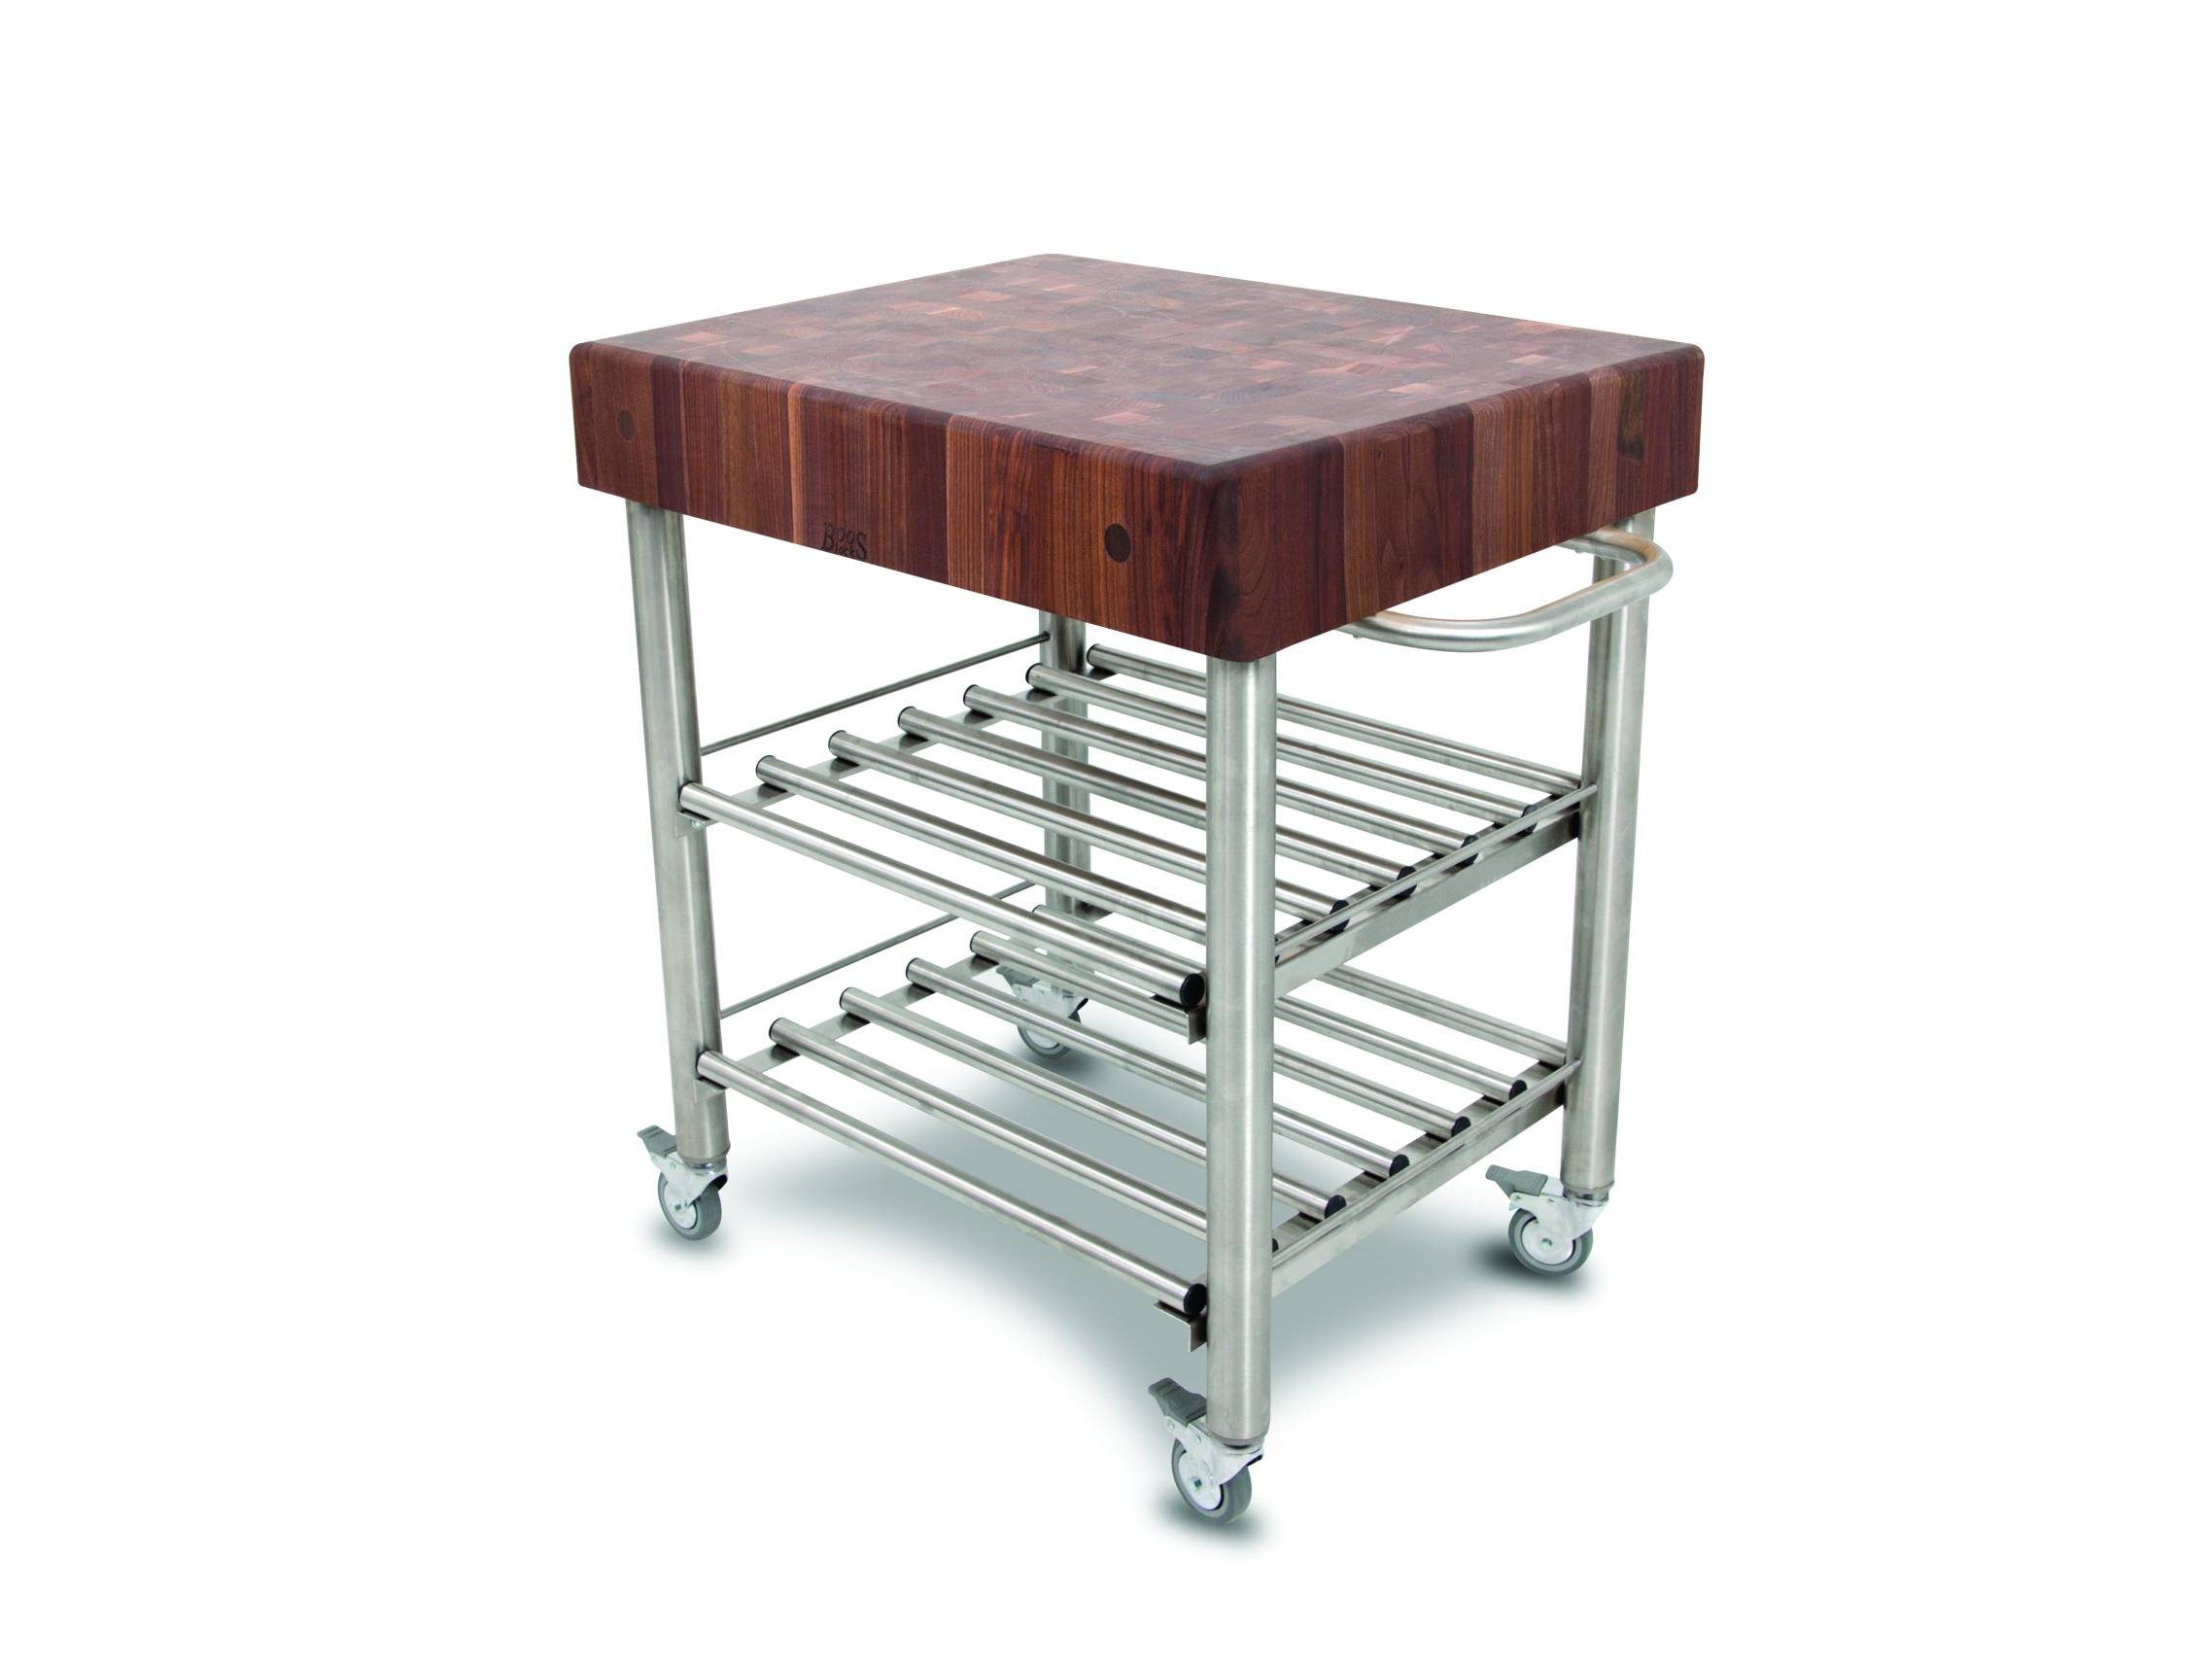 Cucina Kitchen &amp; Wine serving cart with Black Walnut end grain countertop and stainless steel base with 2 shelves, towel rack; lockable casters; 65